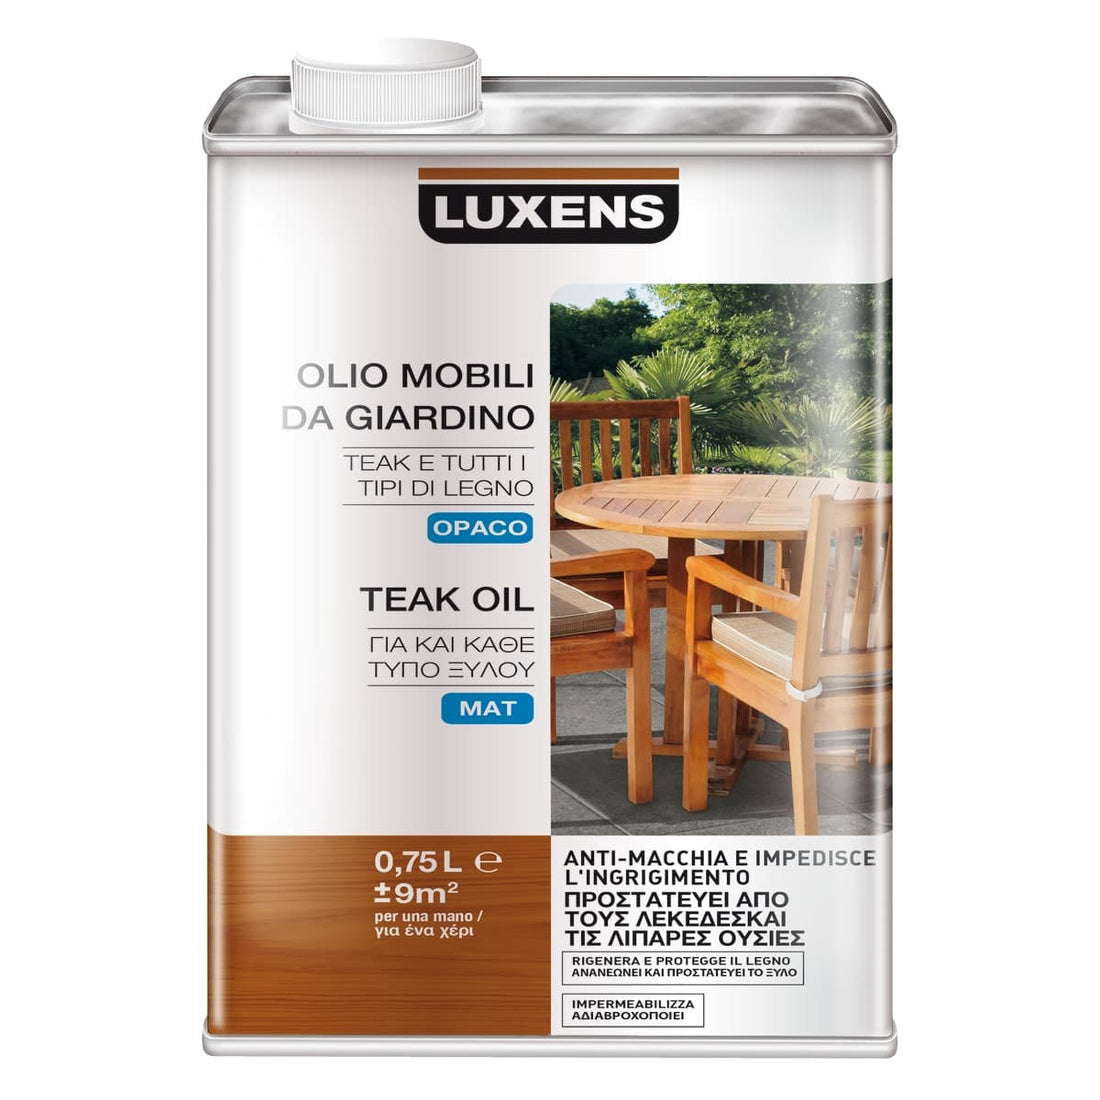 GIADINO LUXENS FURNITURE PROTECTION OIL 750 ML - best price from Maltashopper.com BR470320522